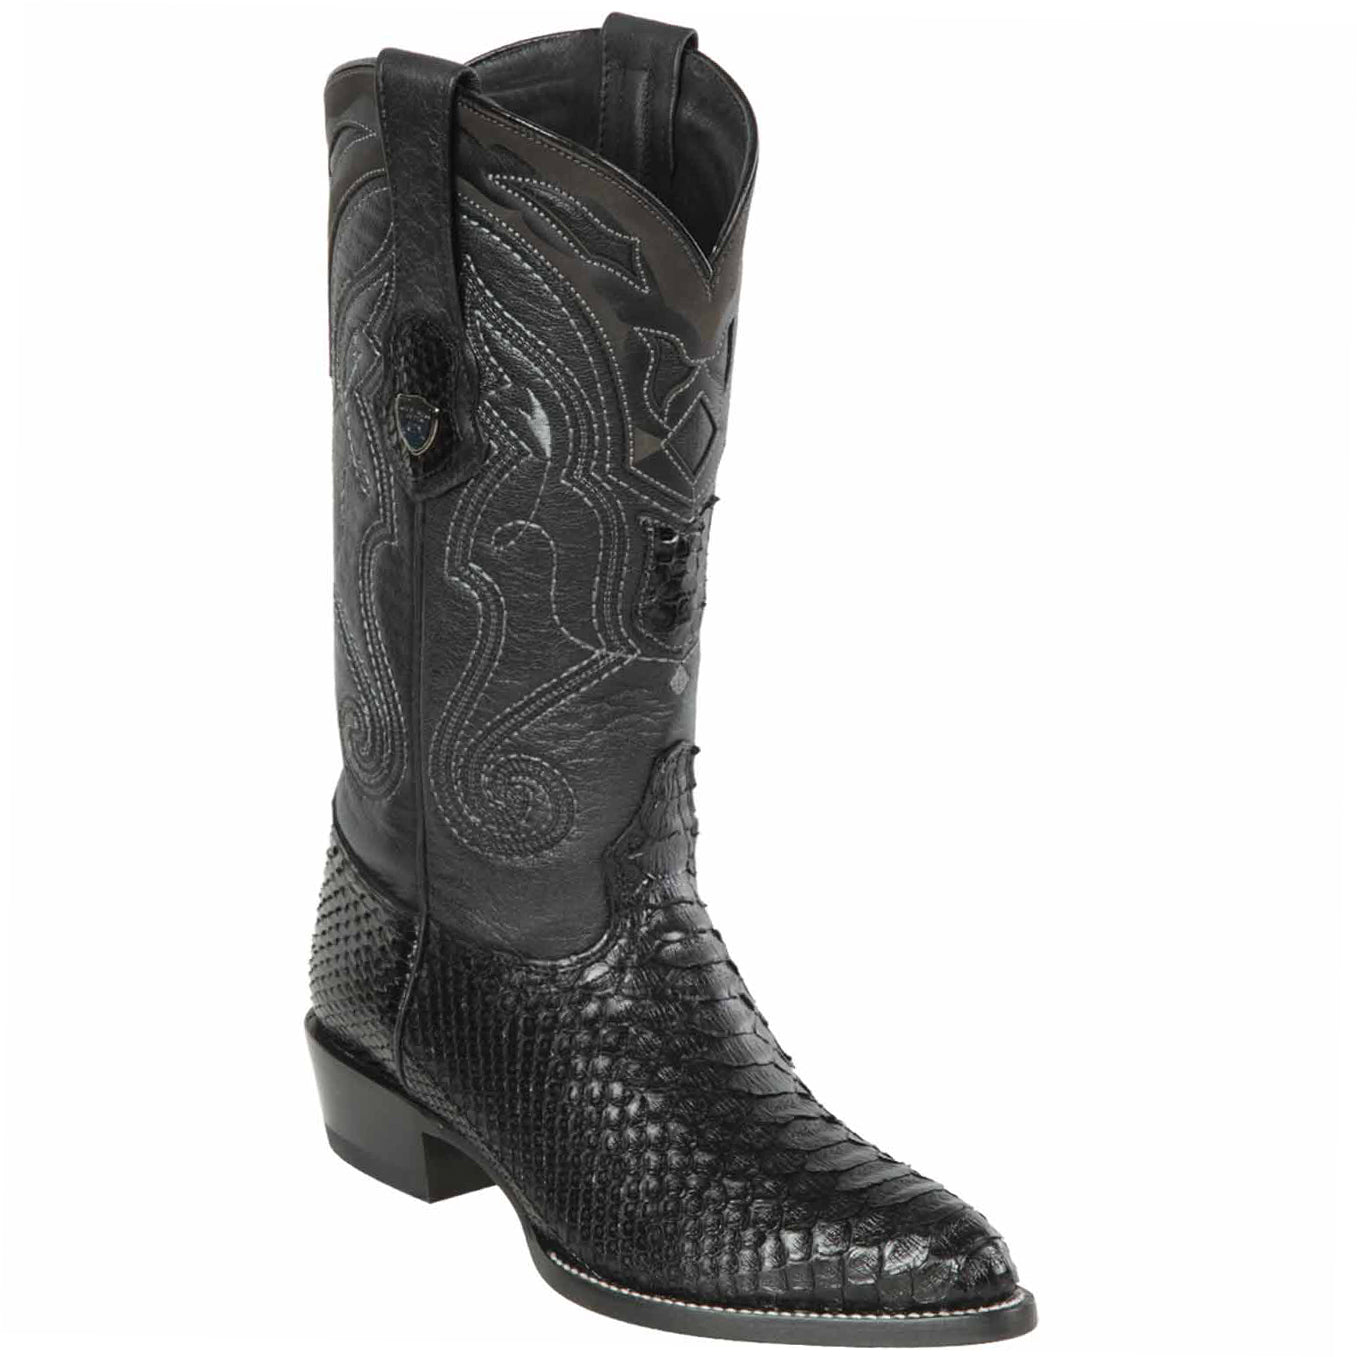 Mens Black Snakeskin Boots by Wild West Boots